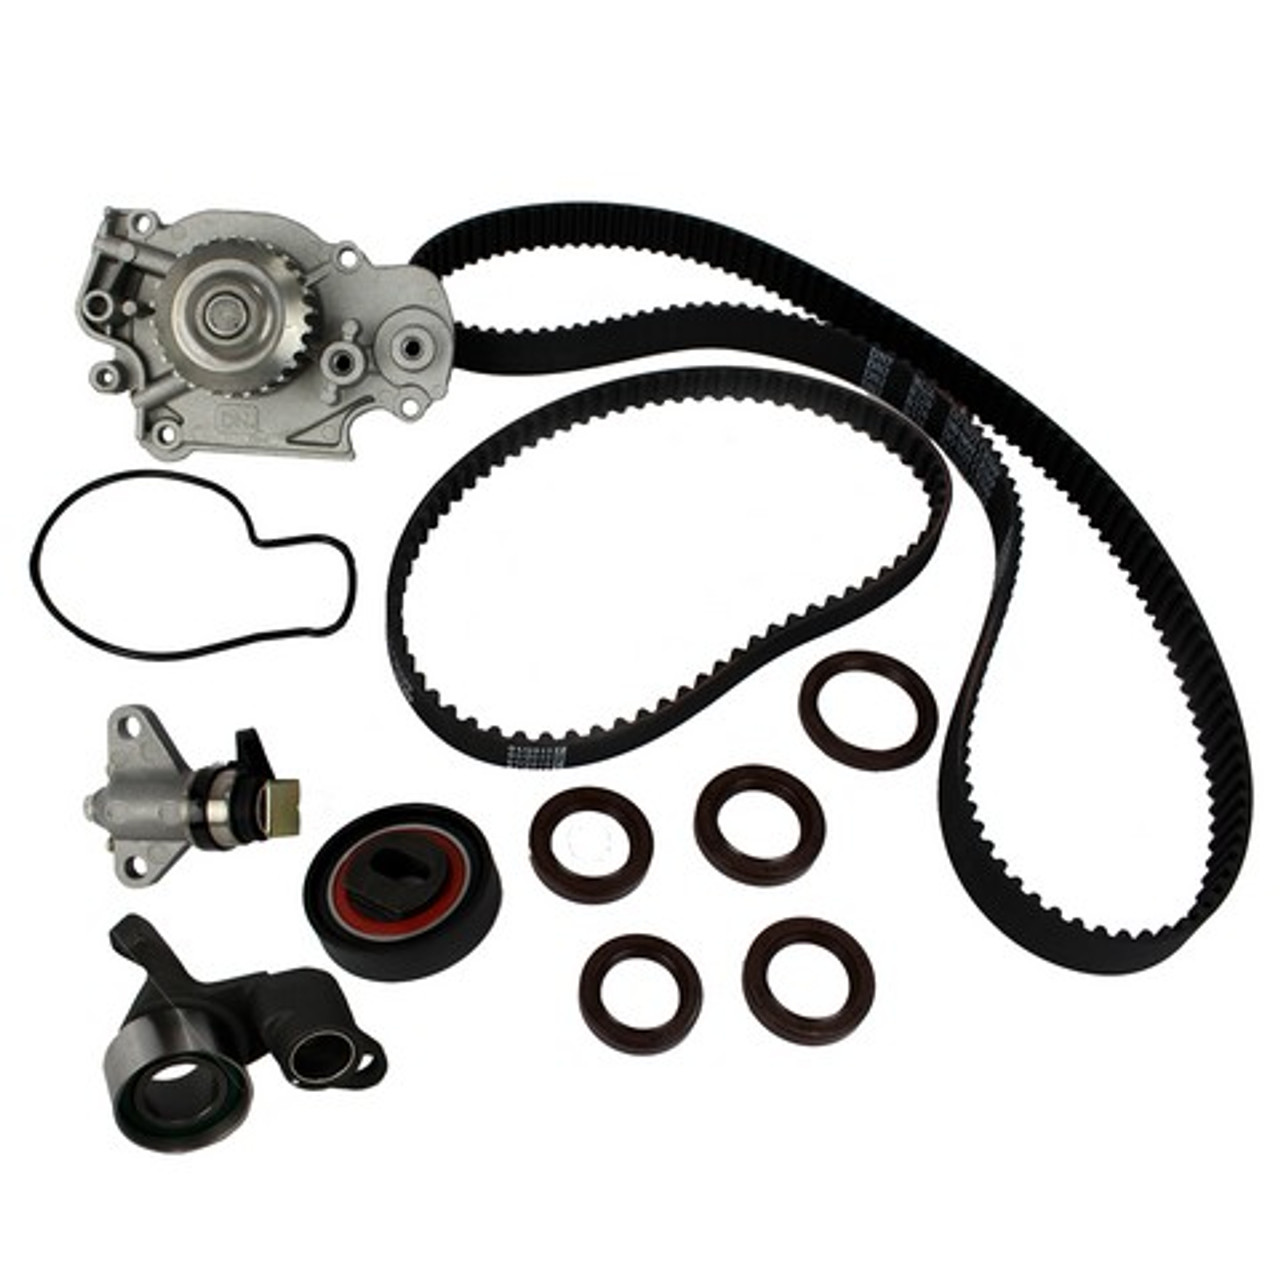 2000 Honda Prelude 2.2L Timing Belt Kit with Water Pump TBK223WP.E8